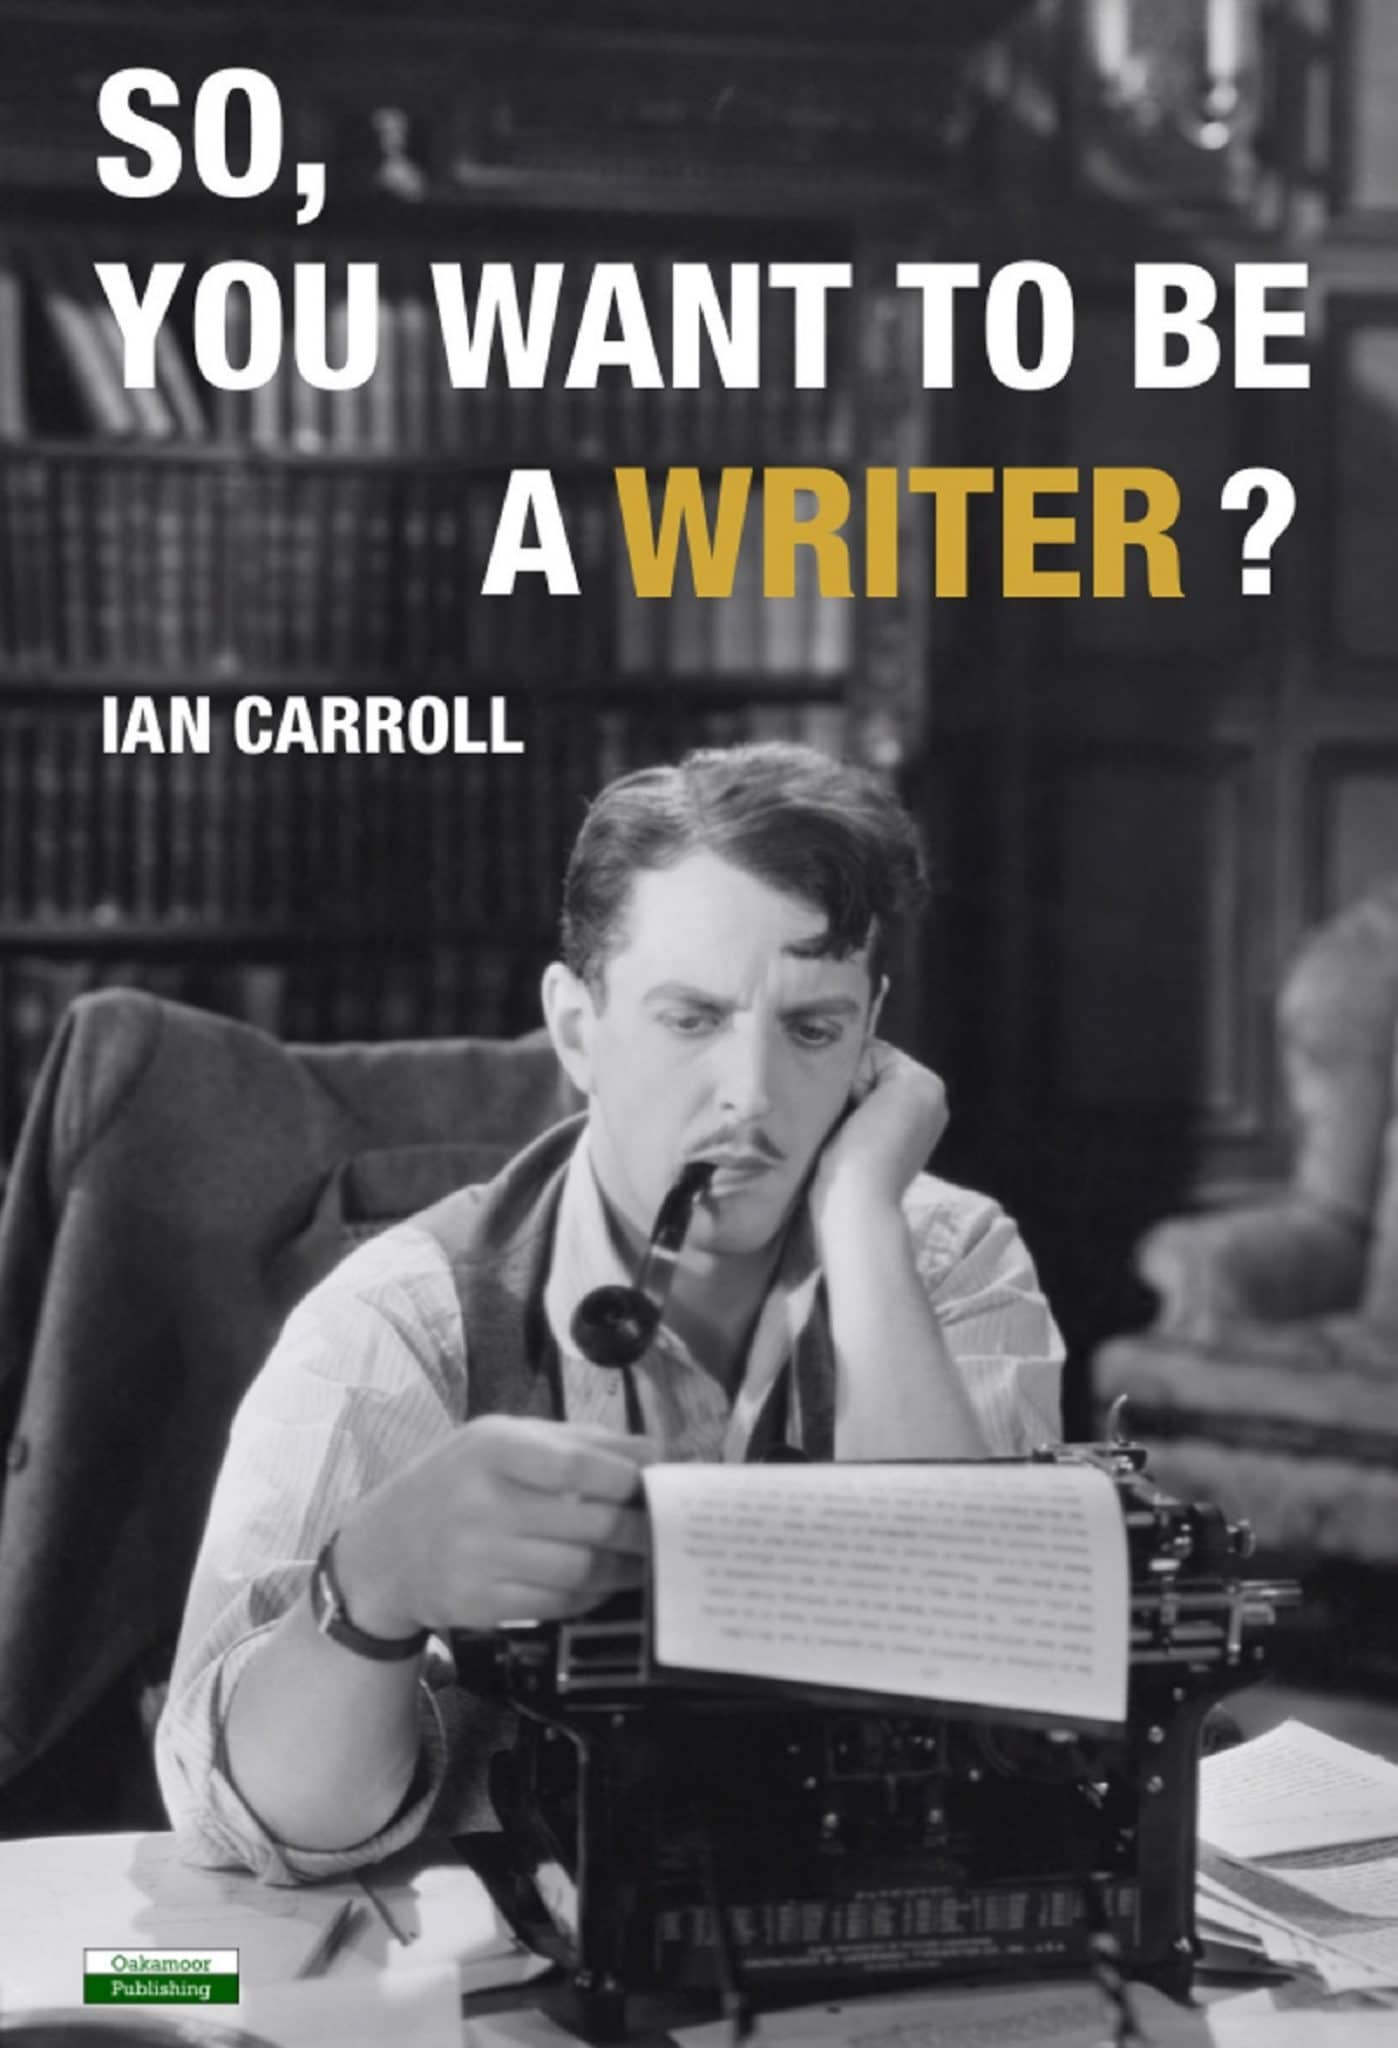 So You Want To Be A Writer